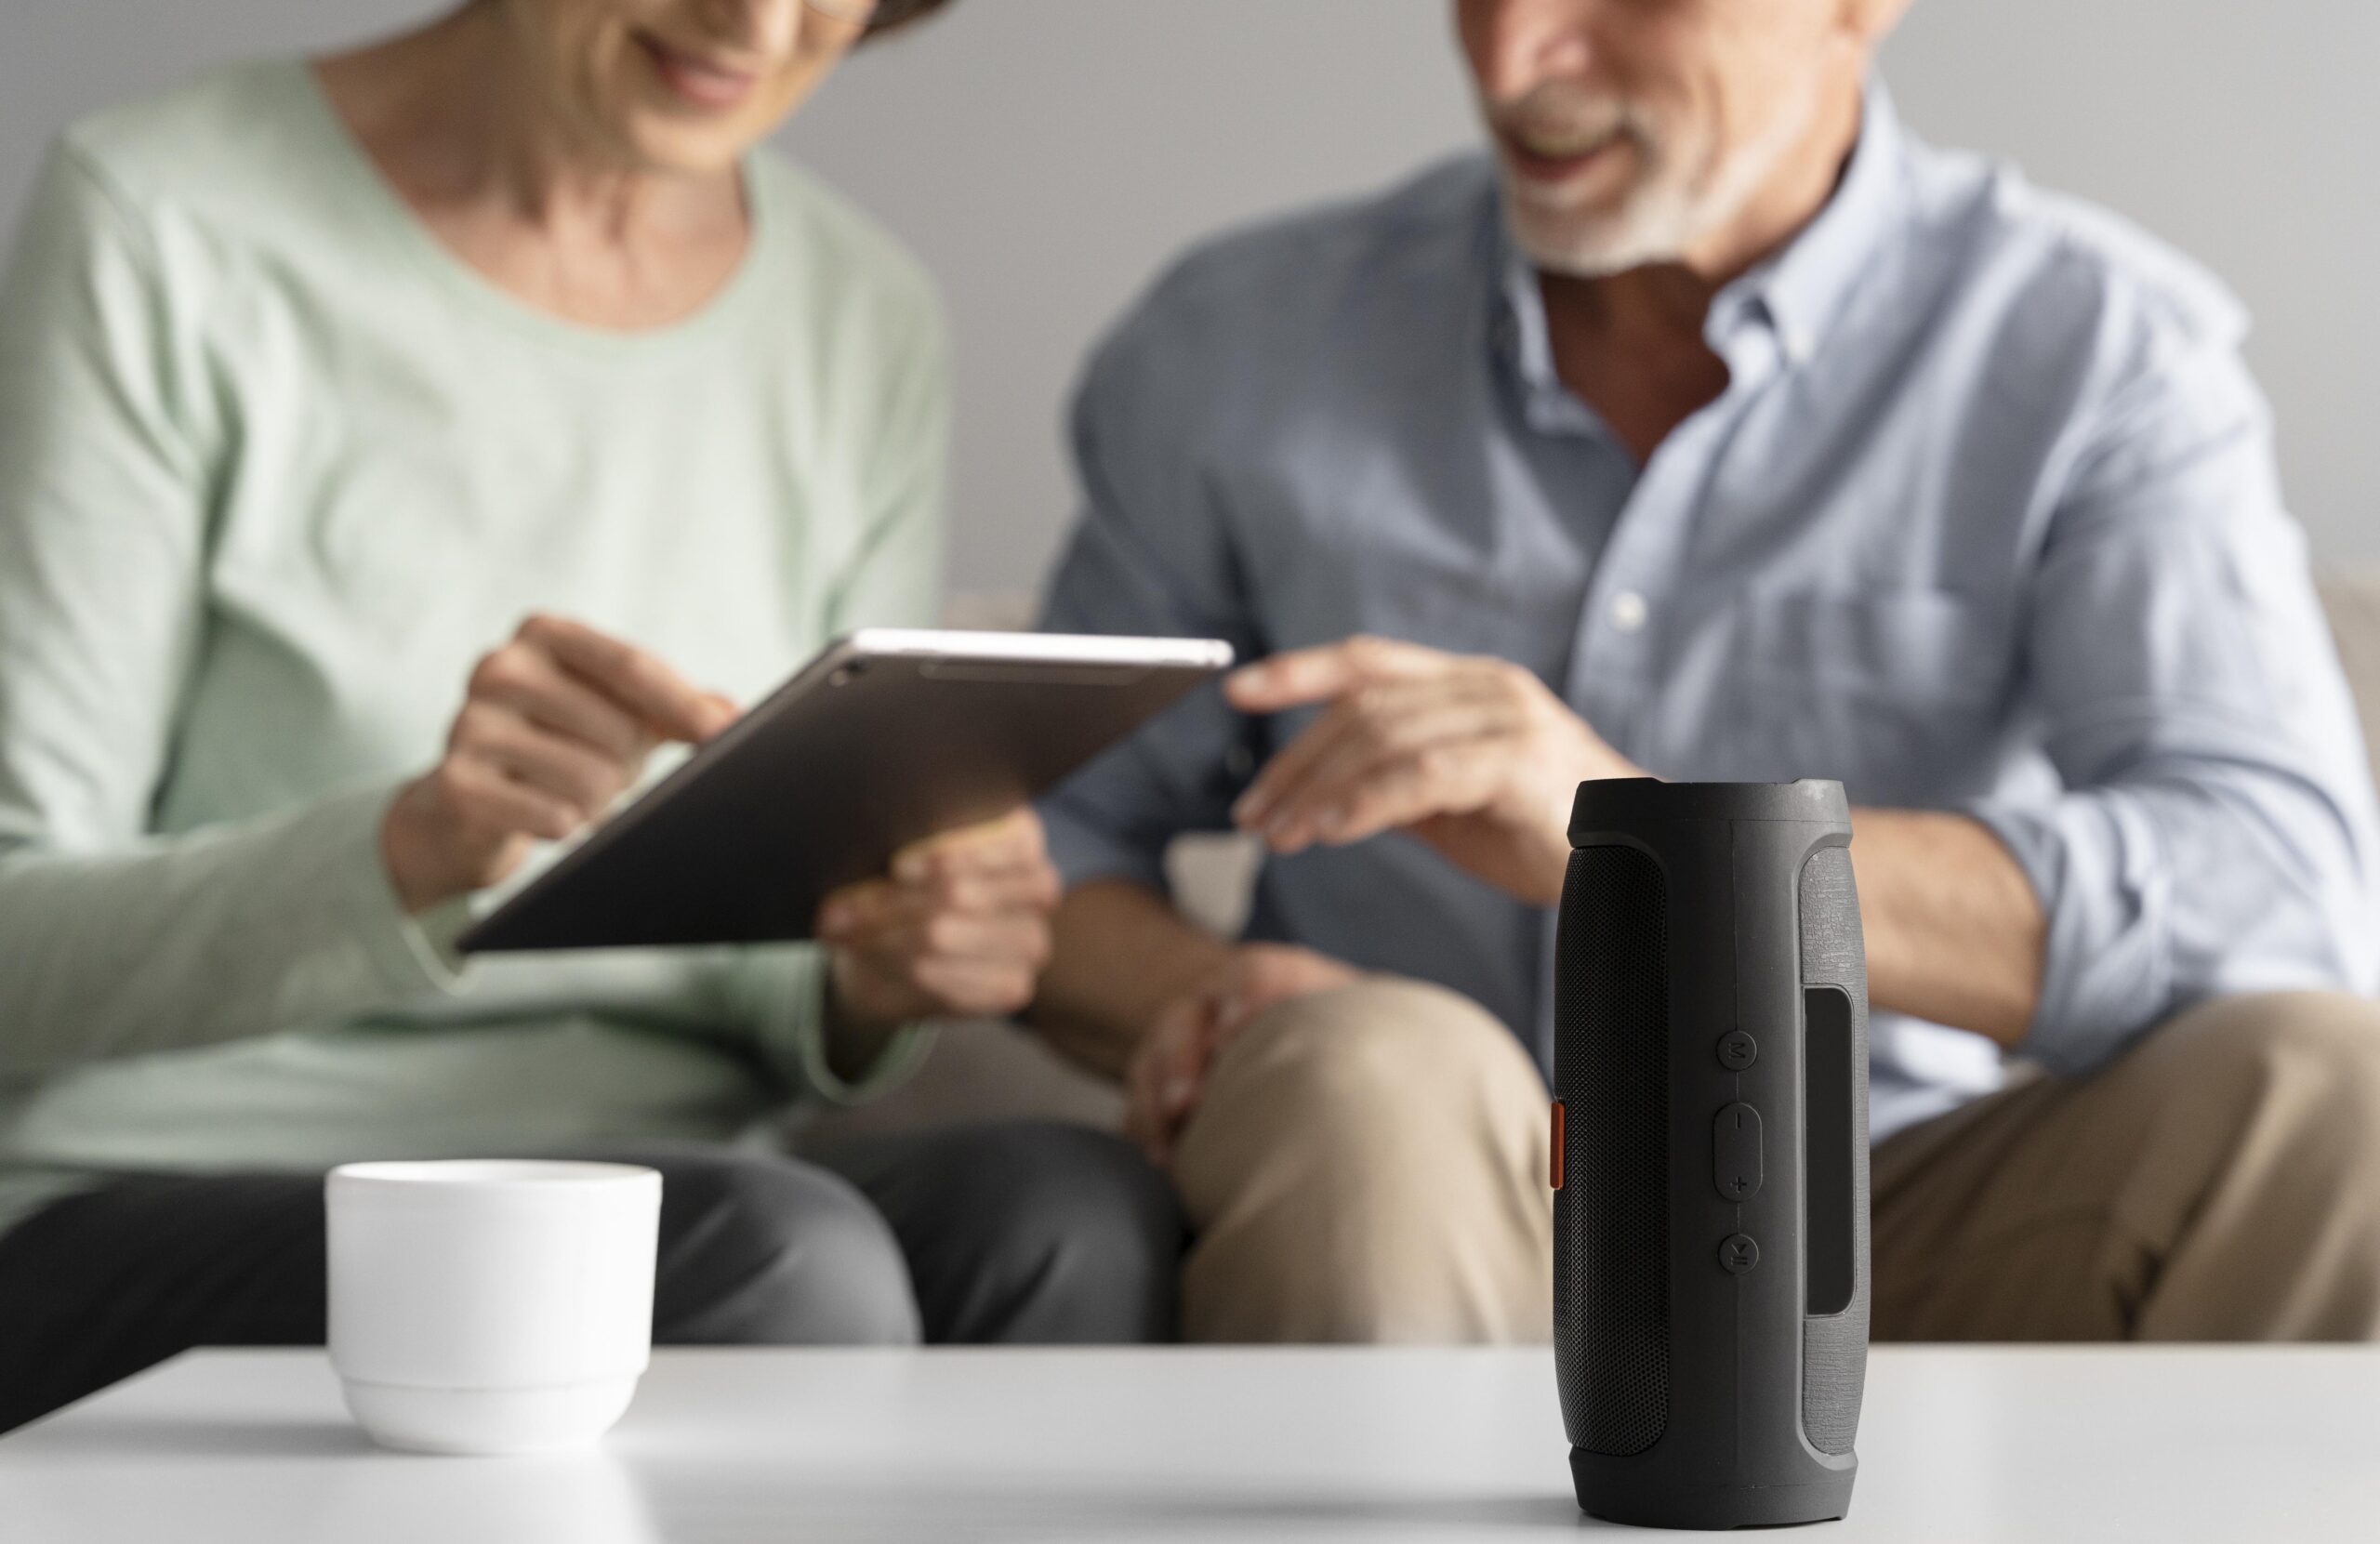 Personalized care of the Elderly with Voice Assistants 47Billion